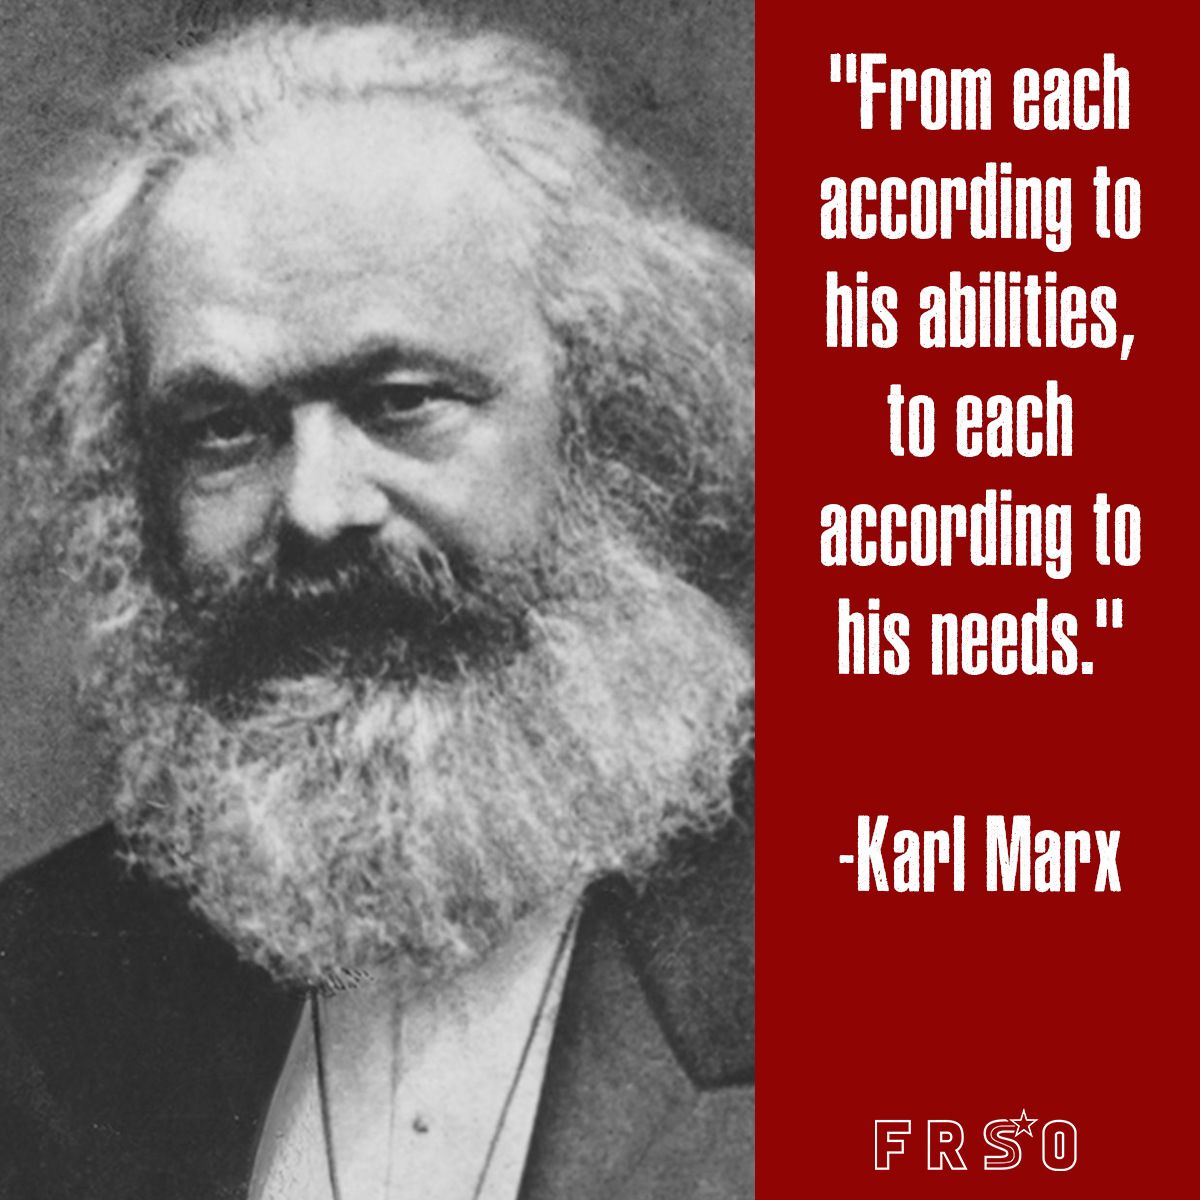 #OnThisDay: May 5, 1818: Karl Marx was born. A philosopher, social scientist, historian, and revolutionary Marx is without a doubt the most influential socialist thinker of the 19th century. #Marx #Germany #Theory #Socialism #Communism